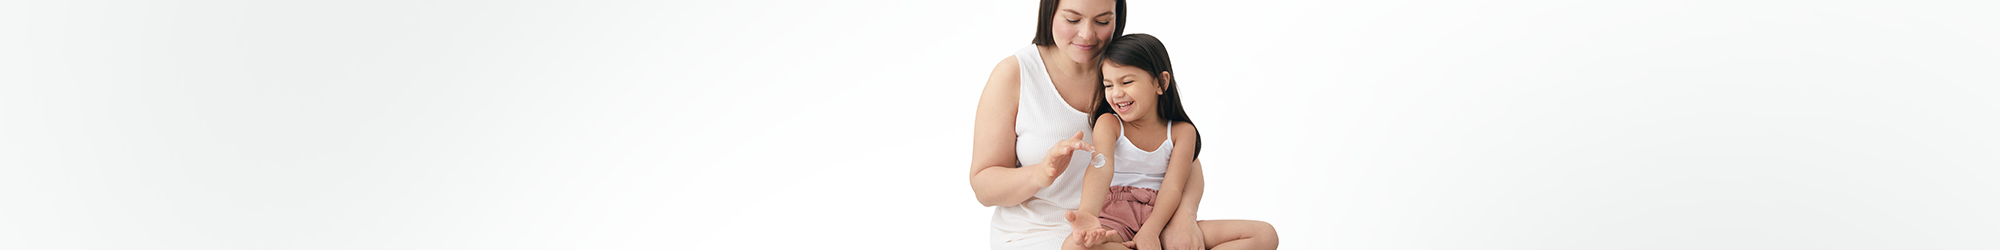 View of a female model applying a cream product on a little girl's arm against a white background.